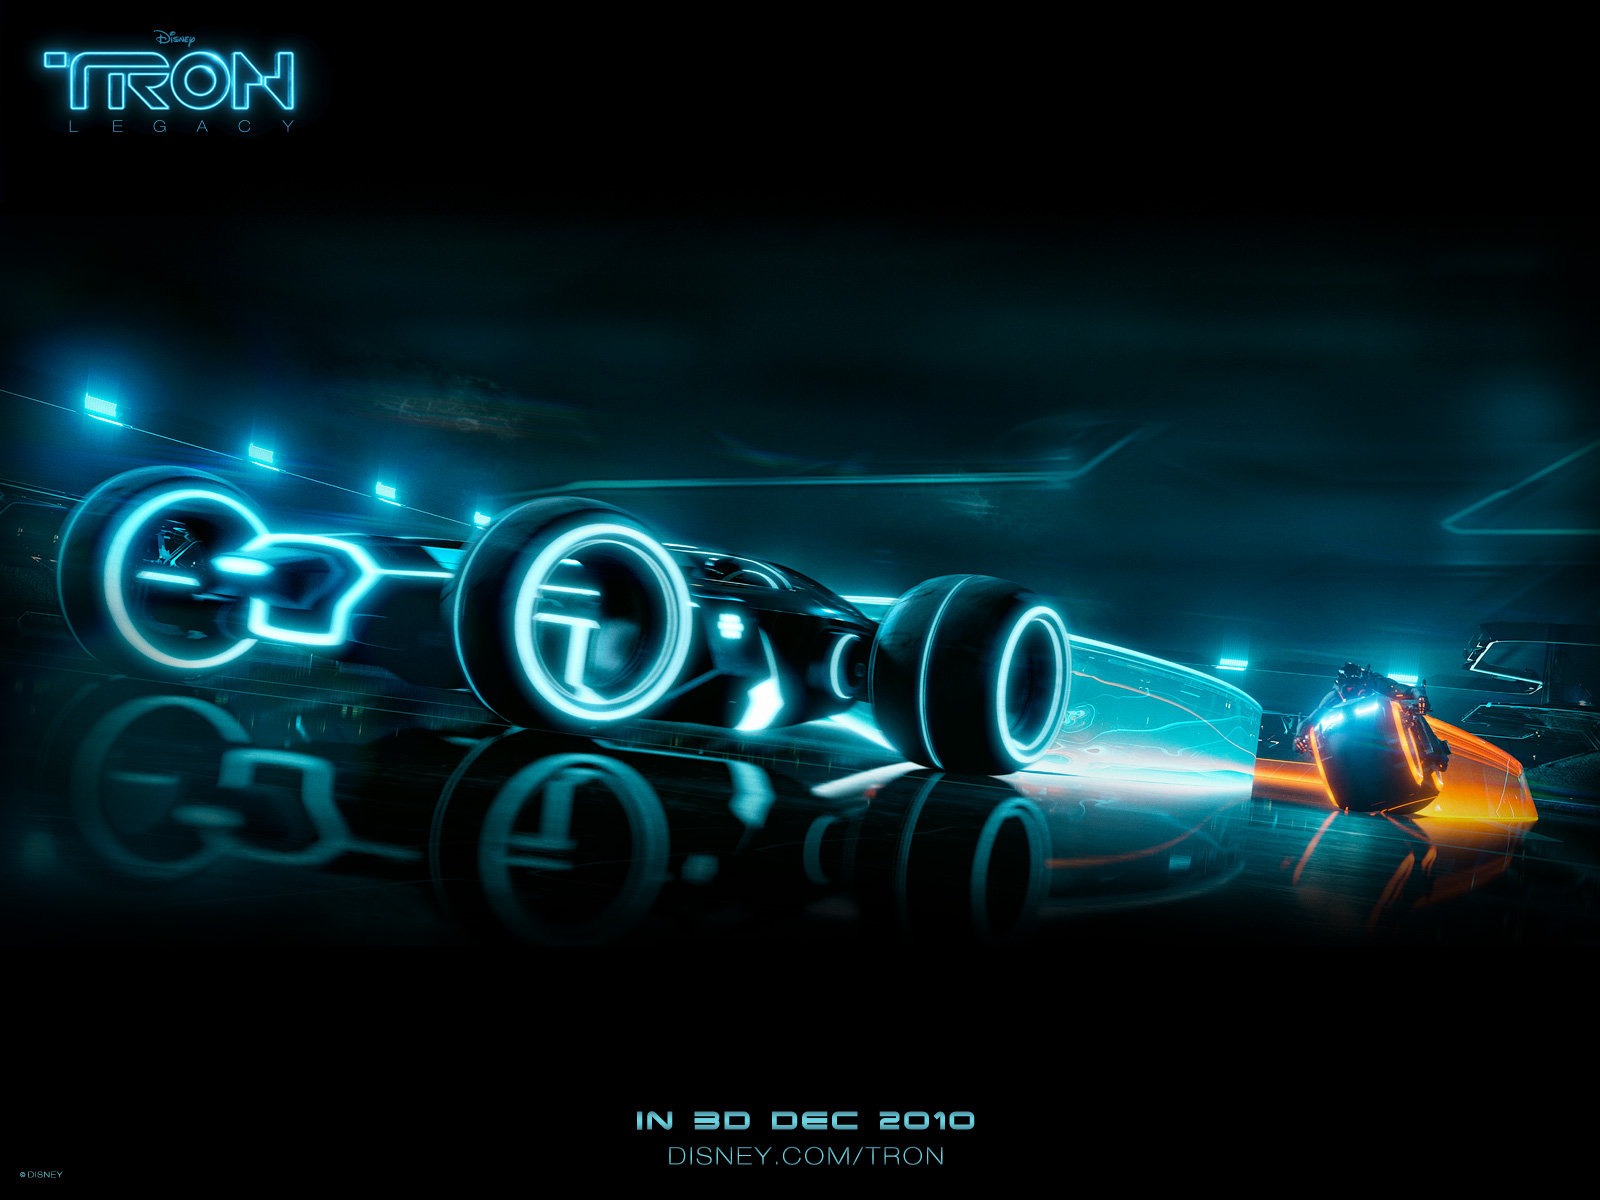 Tron Legacy Characters HD Wallpaper Posters Download Free Wallpapers ...